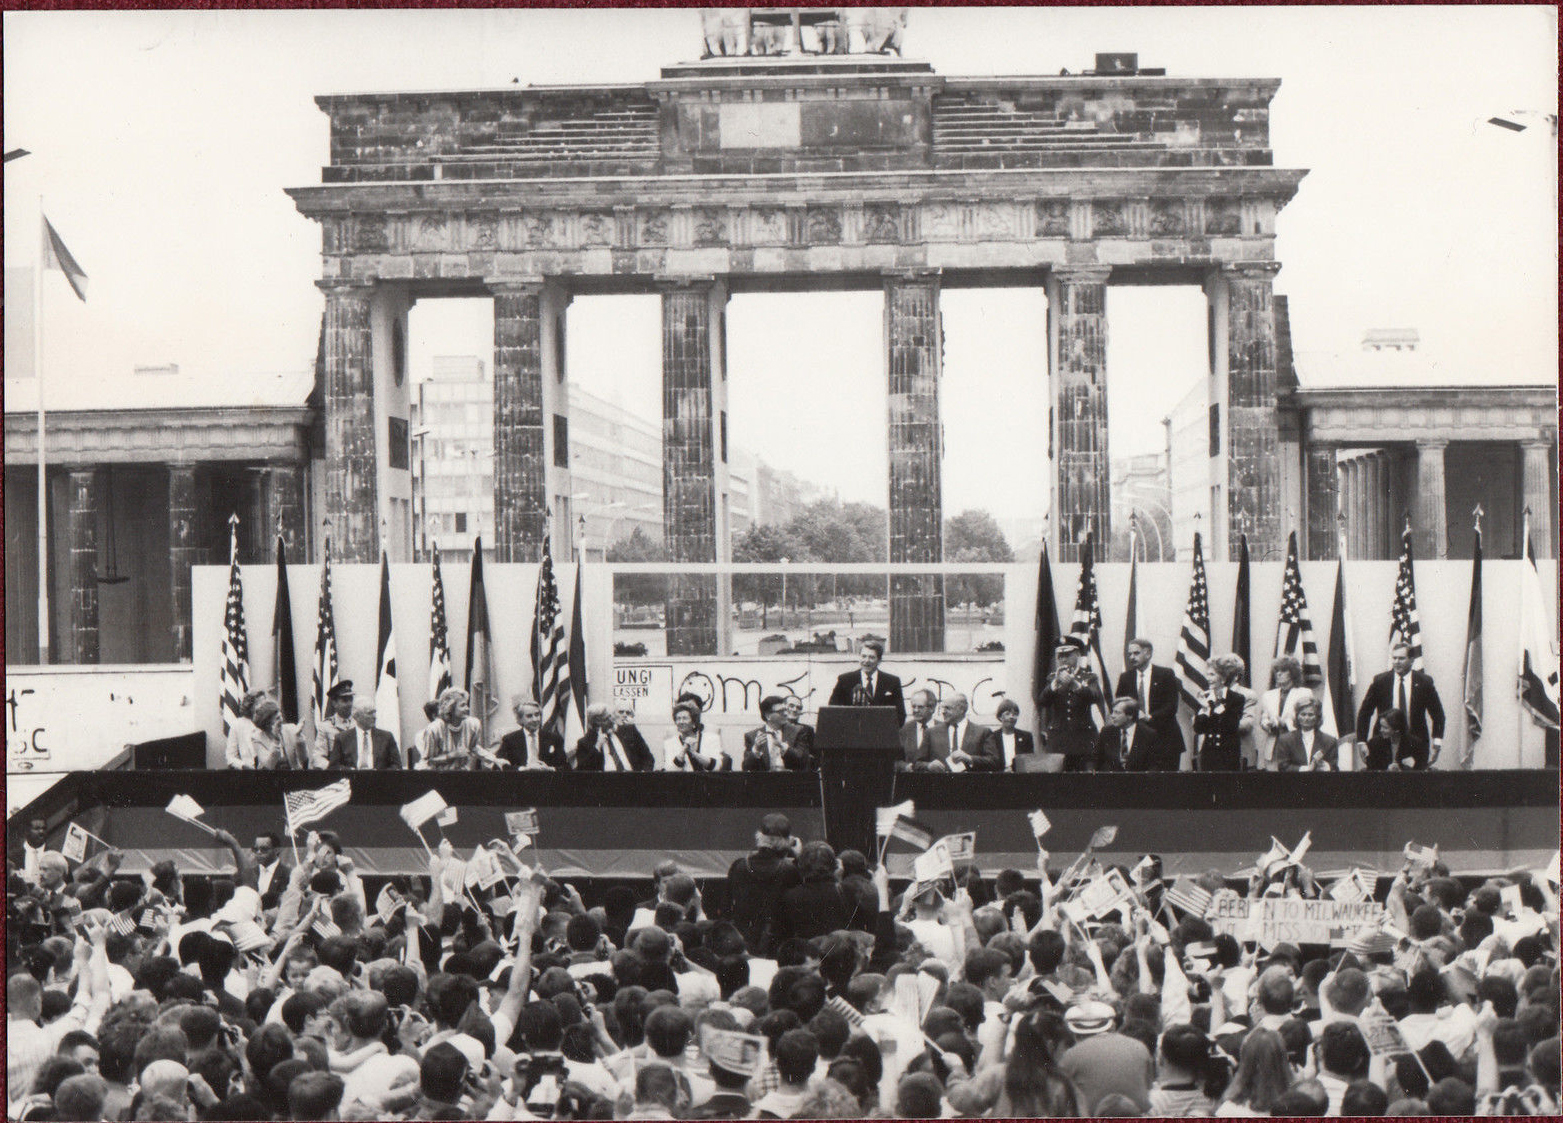 The US president Ronald Regan in front of the crowd with the Berlin Wall behind him. 